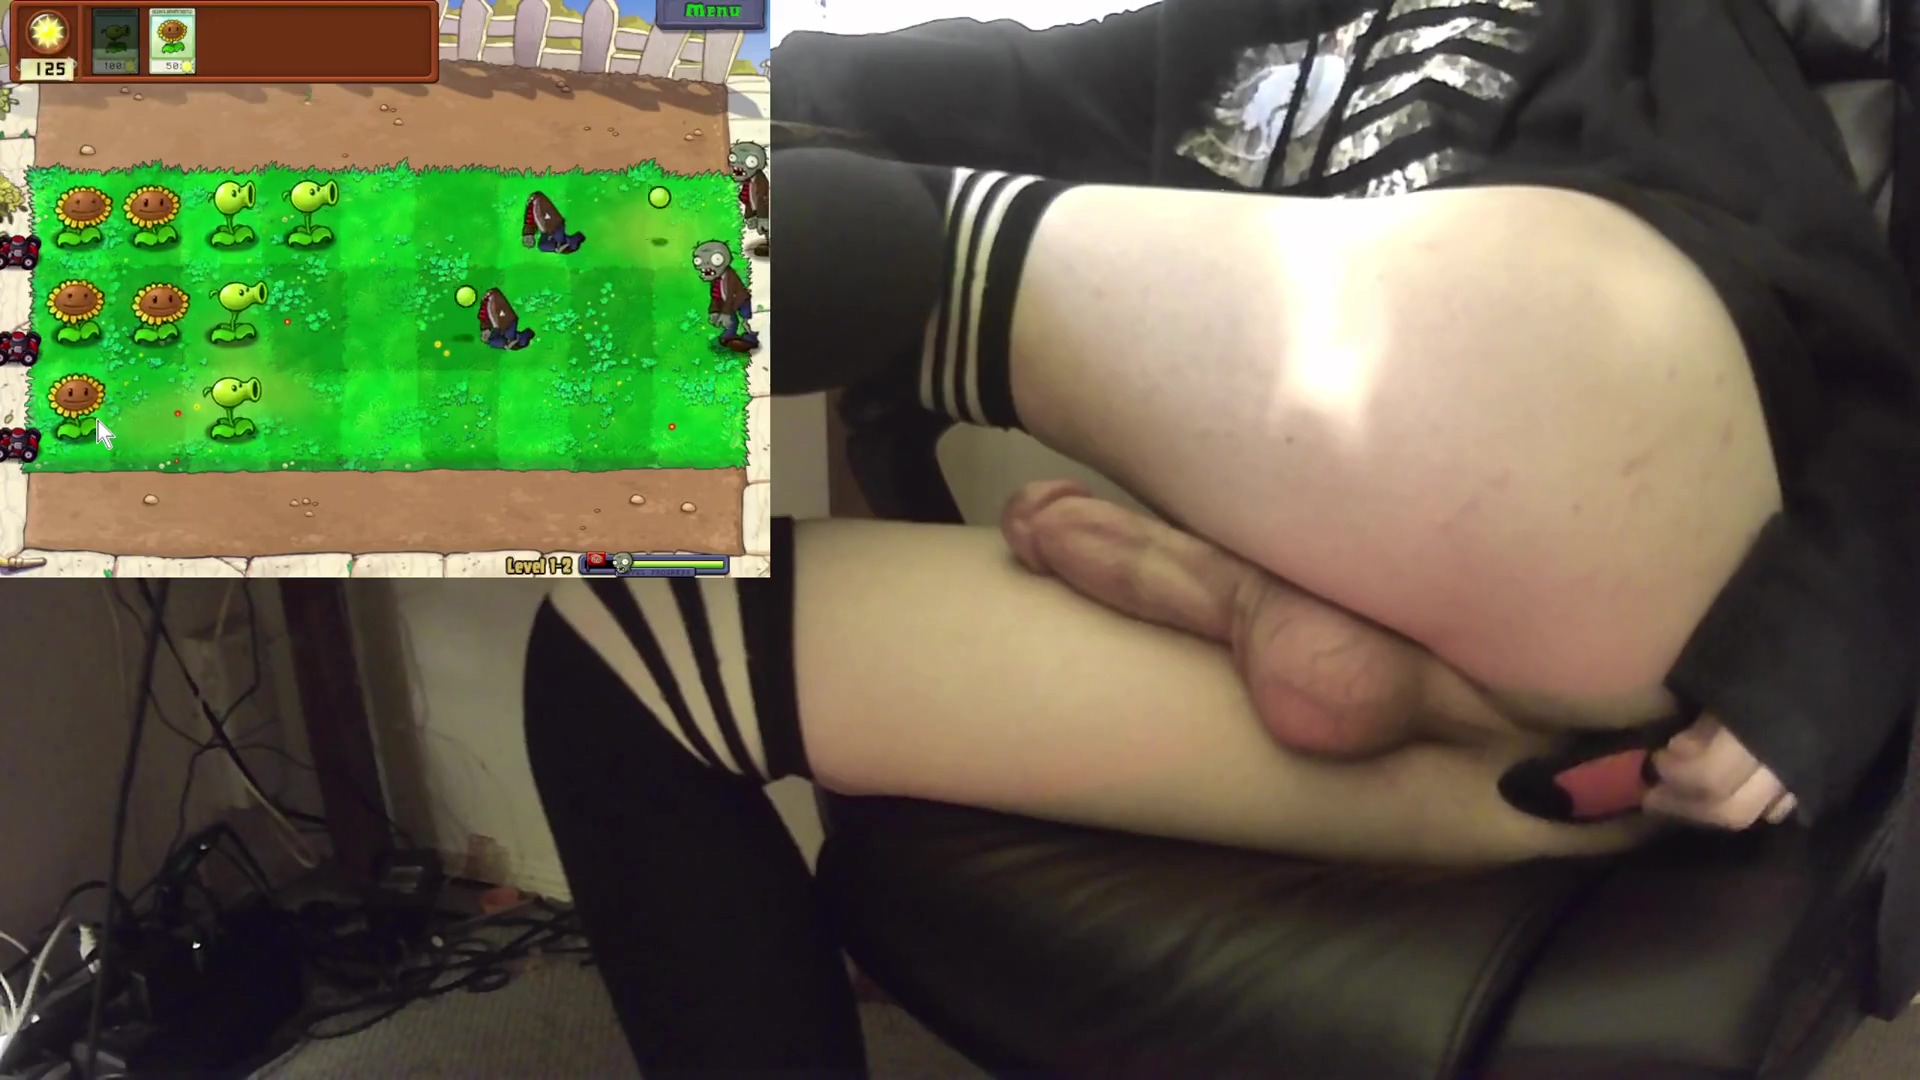 Femboy Gaming Plants Vs Zombies #1 + Thrusting Buttplug Shemale Porn Video - Shemale and Tranny Porn Tube image photo